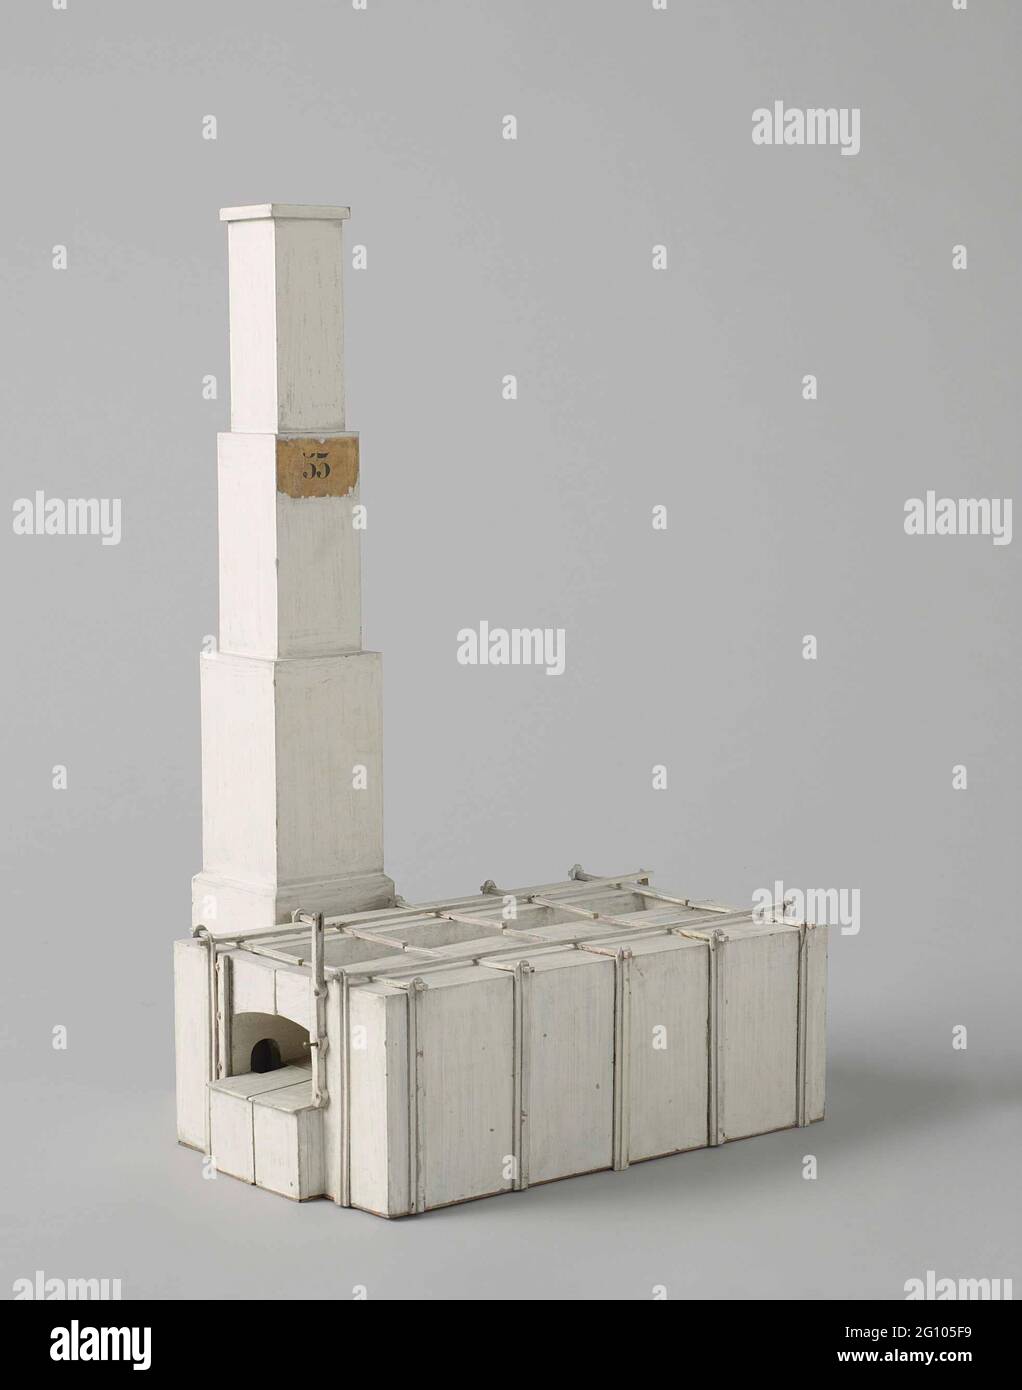 Model of a Heating Furnace. Model of a glow rivet, completely white,  consisting of the oven compartment and the chimney, incomplete. The oven  compartment is provided with trellis on the outside and